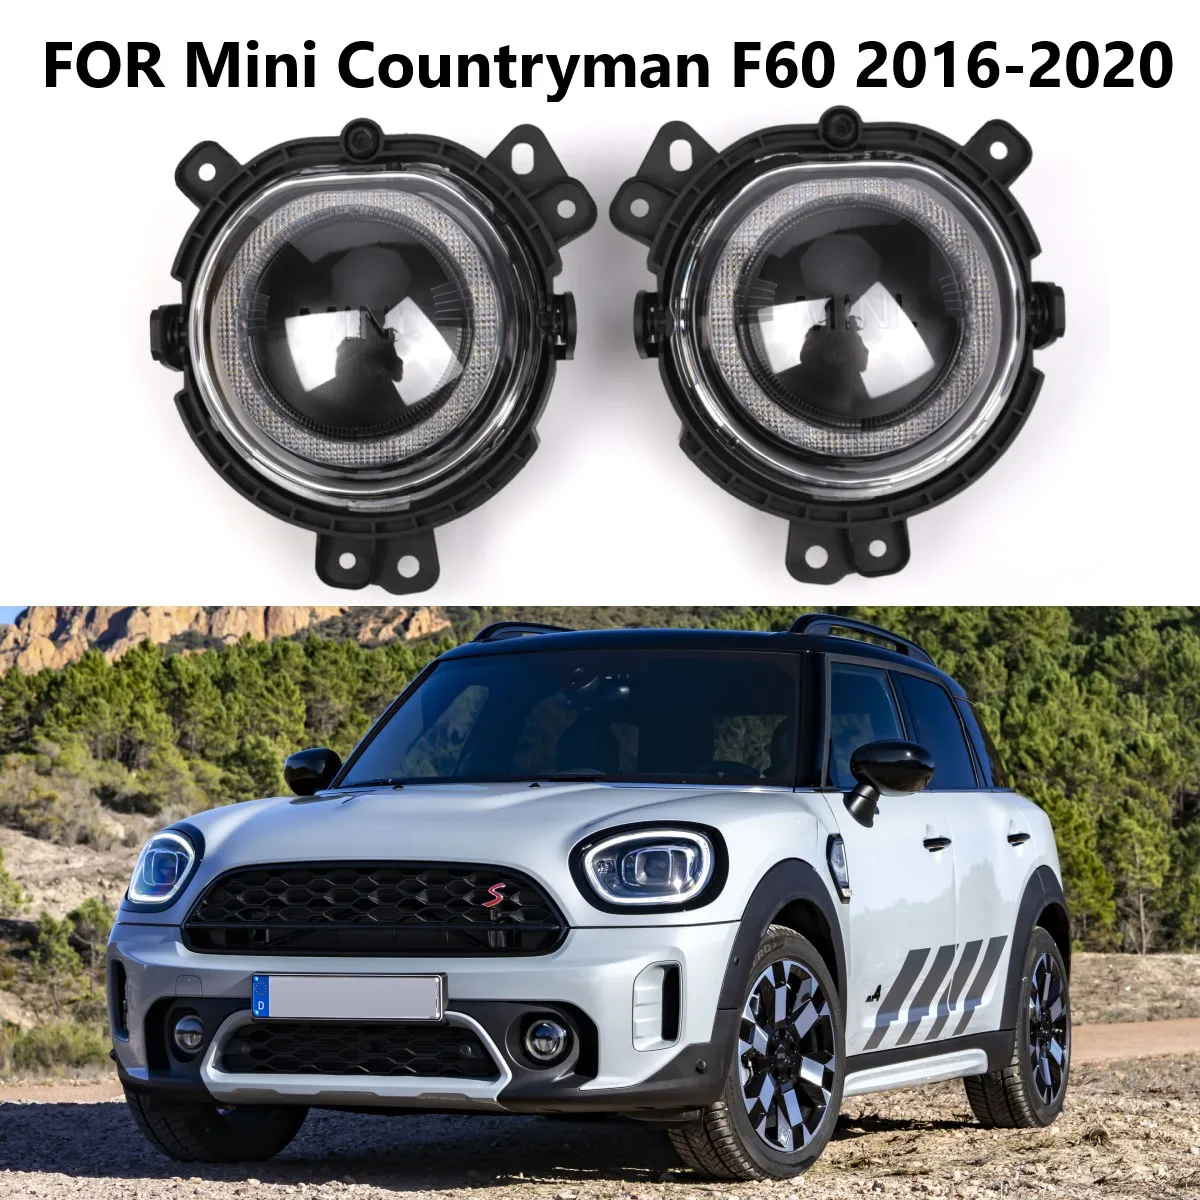 

Left Right White LED Fog Lamp Foglight Replacement Parts Daytime Running Lights For Mini Countryman F60 2016 2017 2018 2019 2020